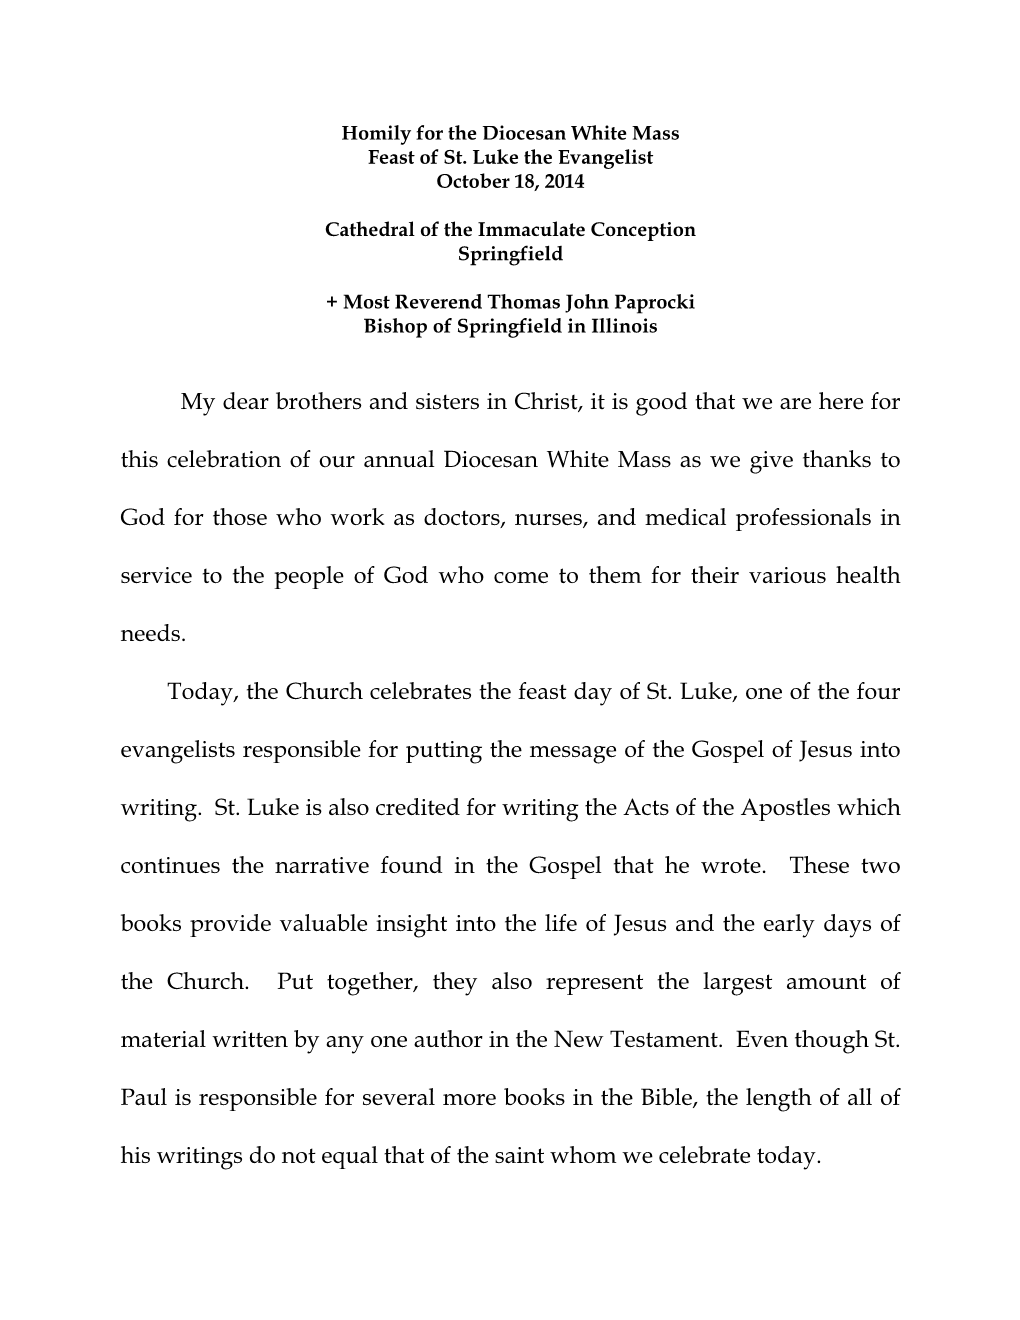 Homily for the Diocesan White Mass Feast of St